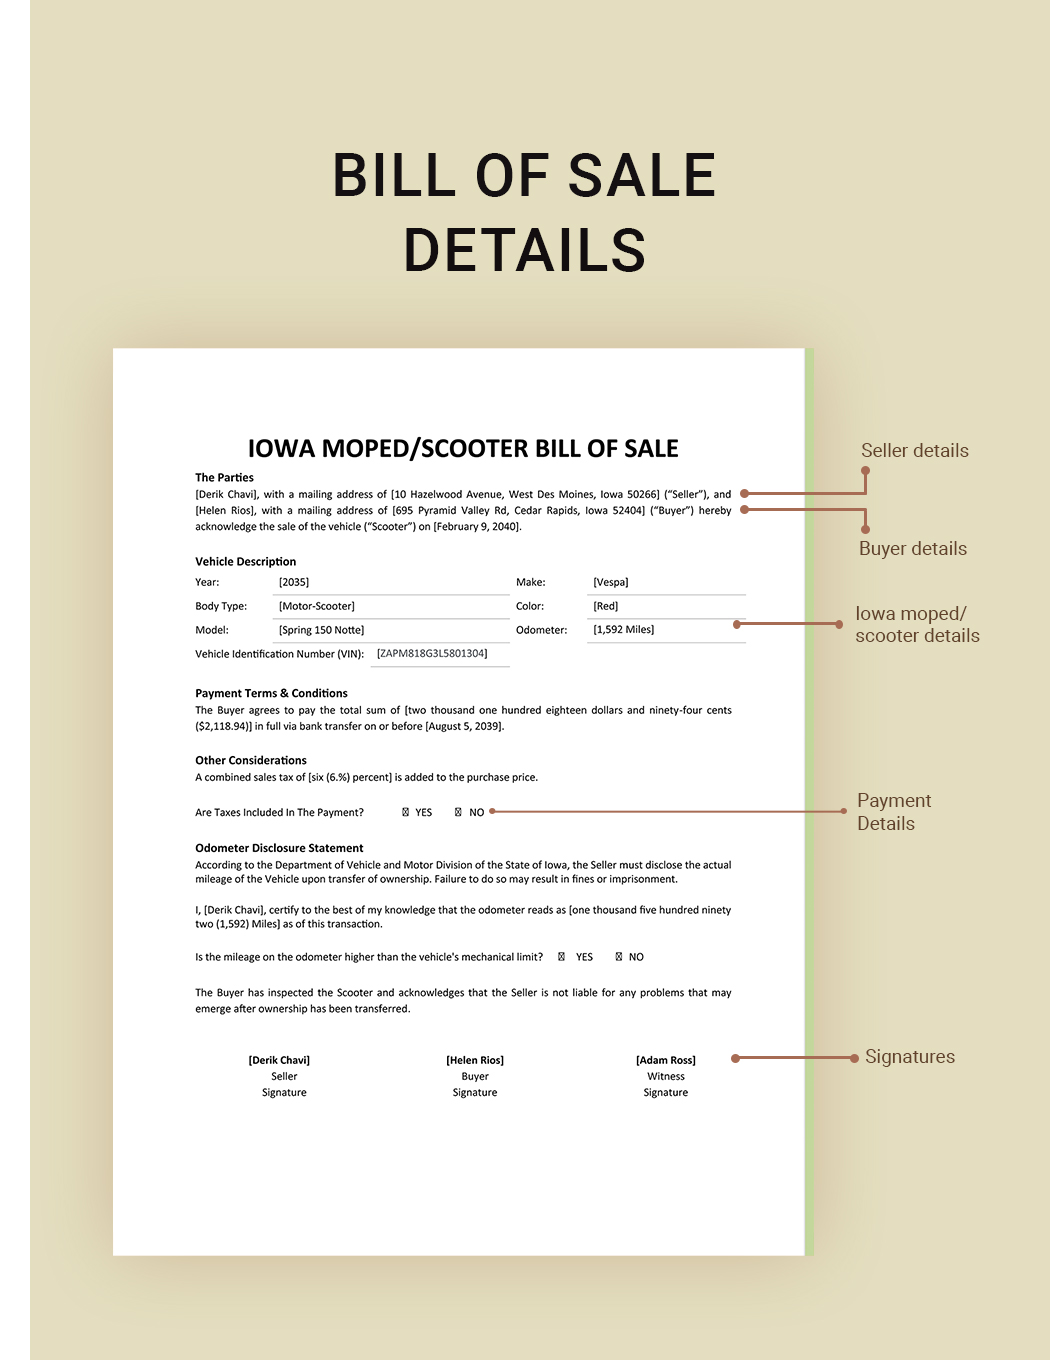 Iowa Moped / Scooter Bill Of Sale Template